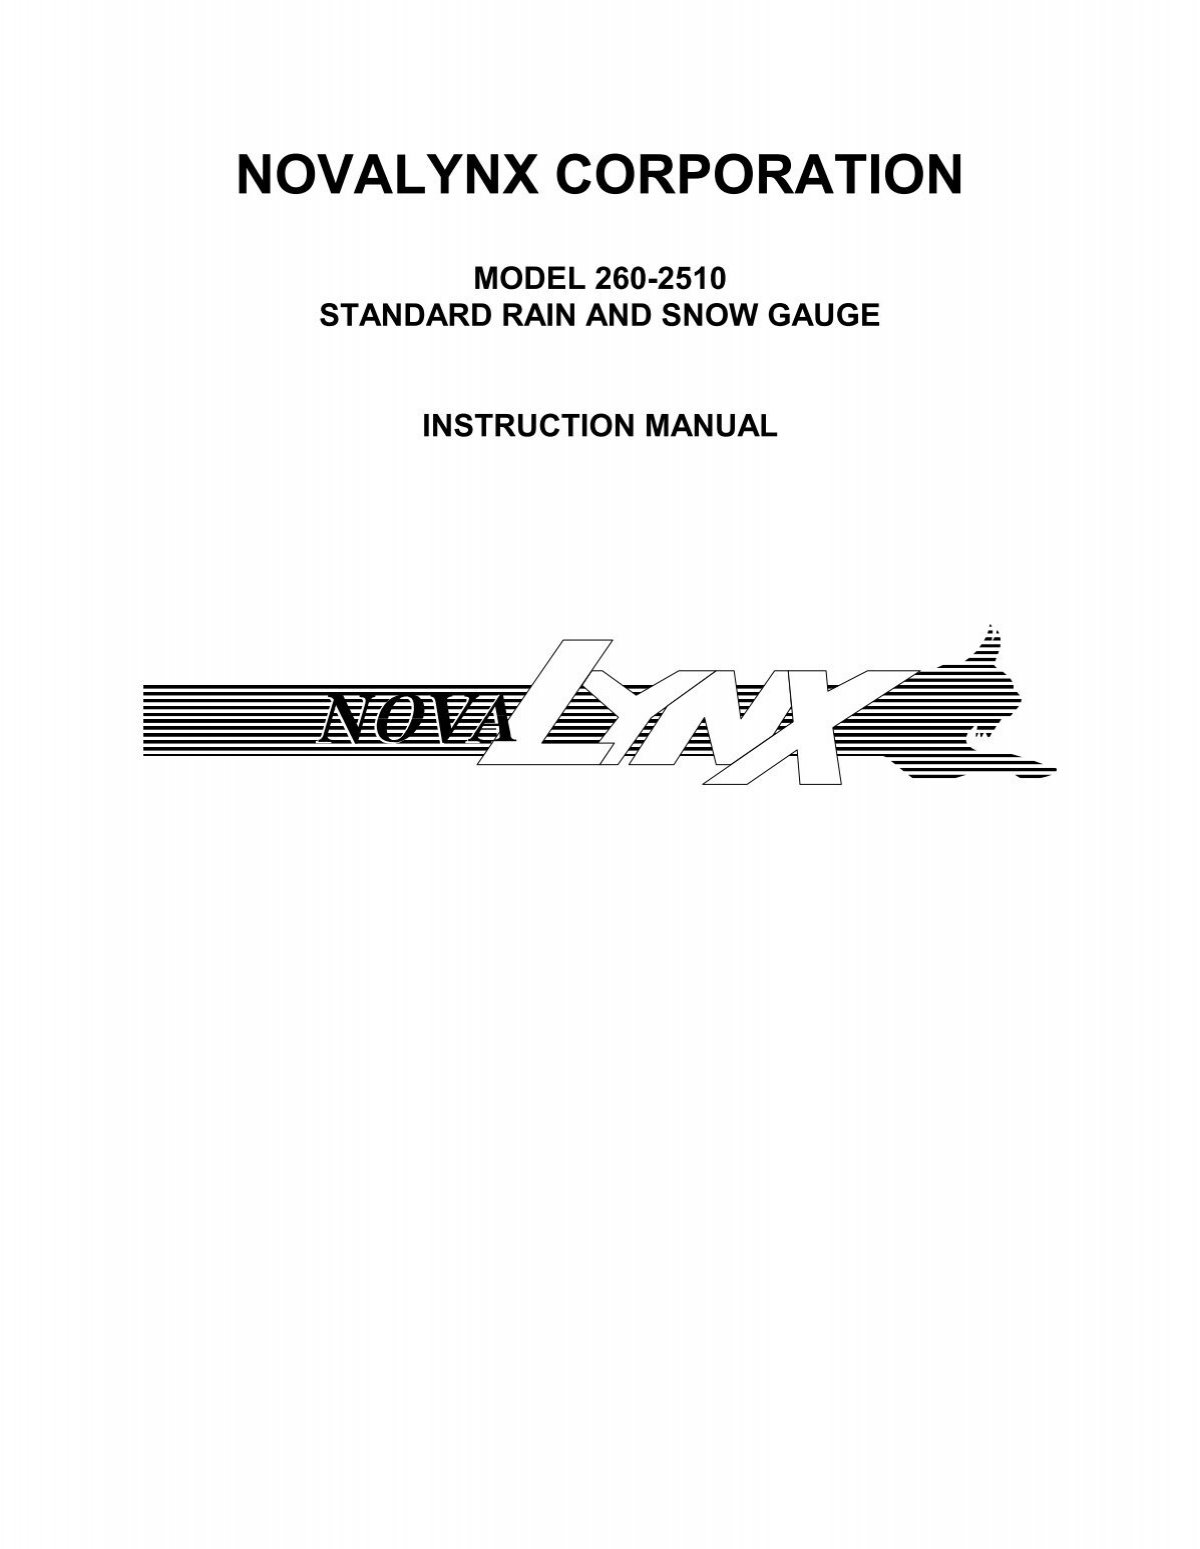 110-WS-32 Packaged Weather Stations - NovaLynx Corporation